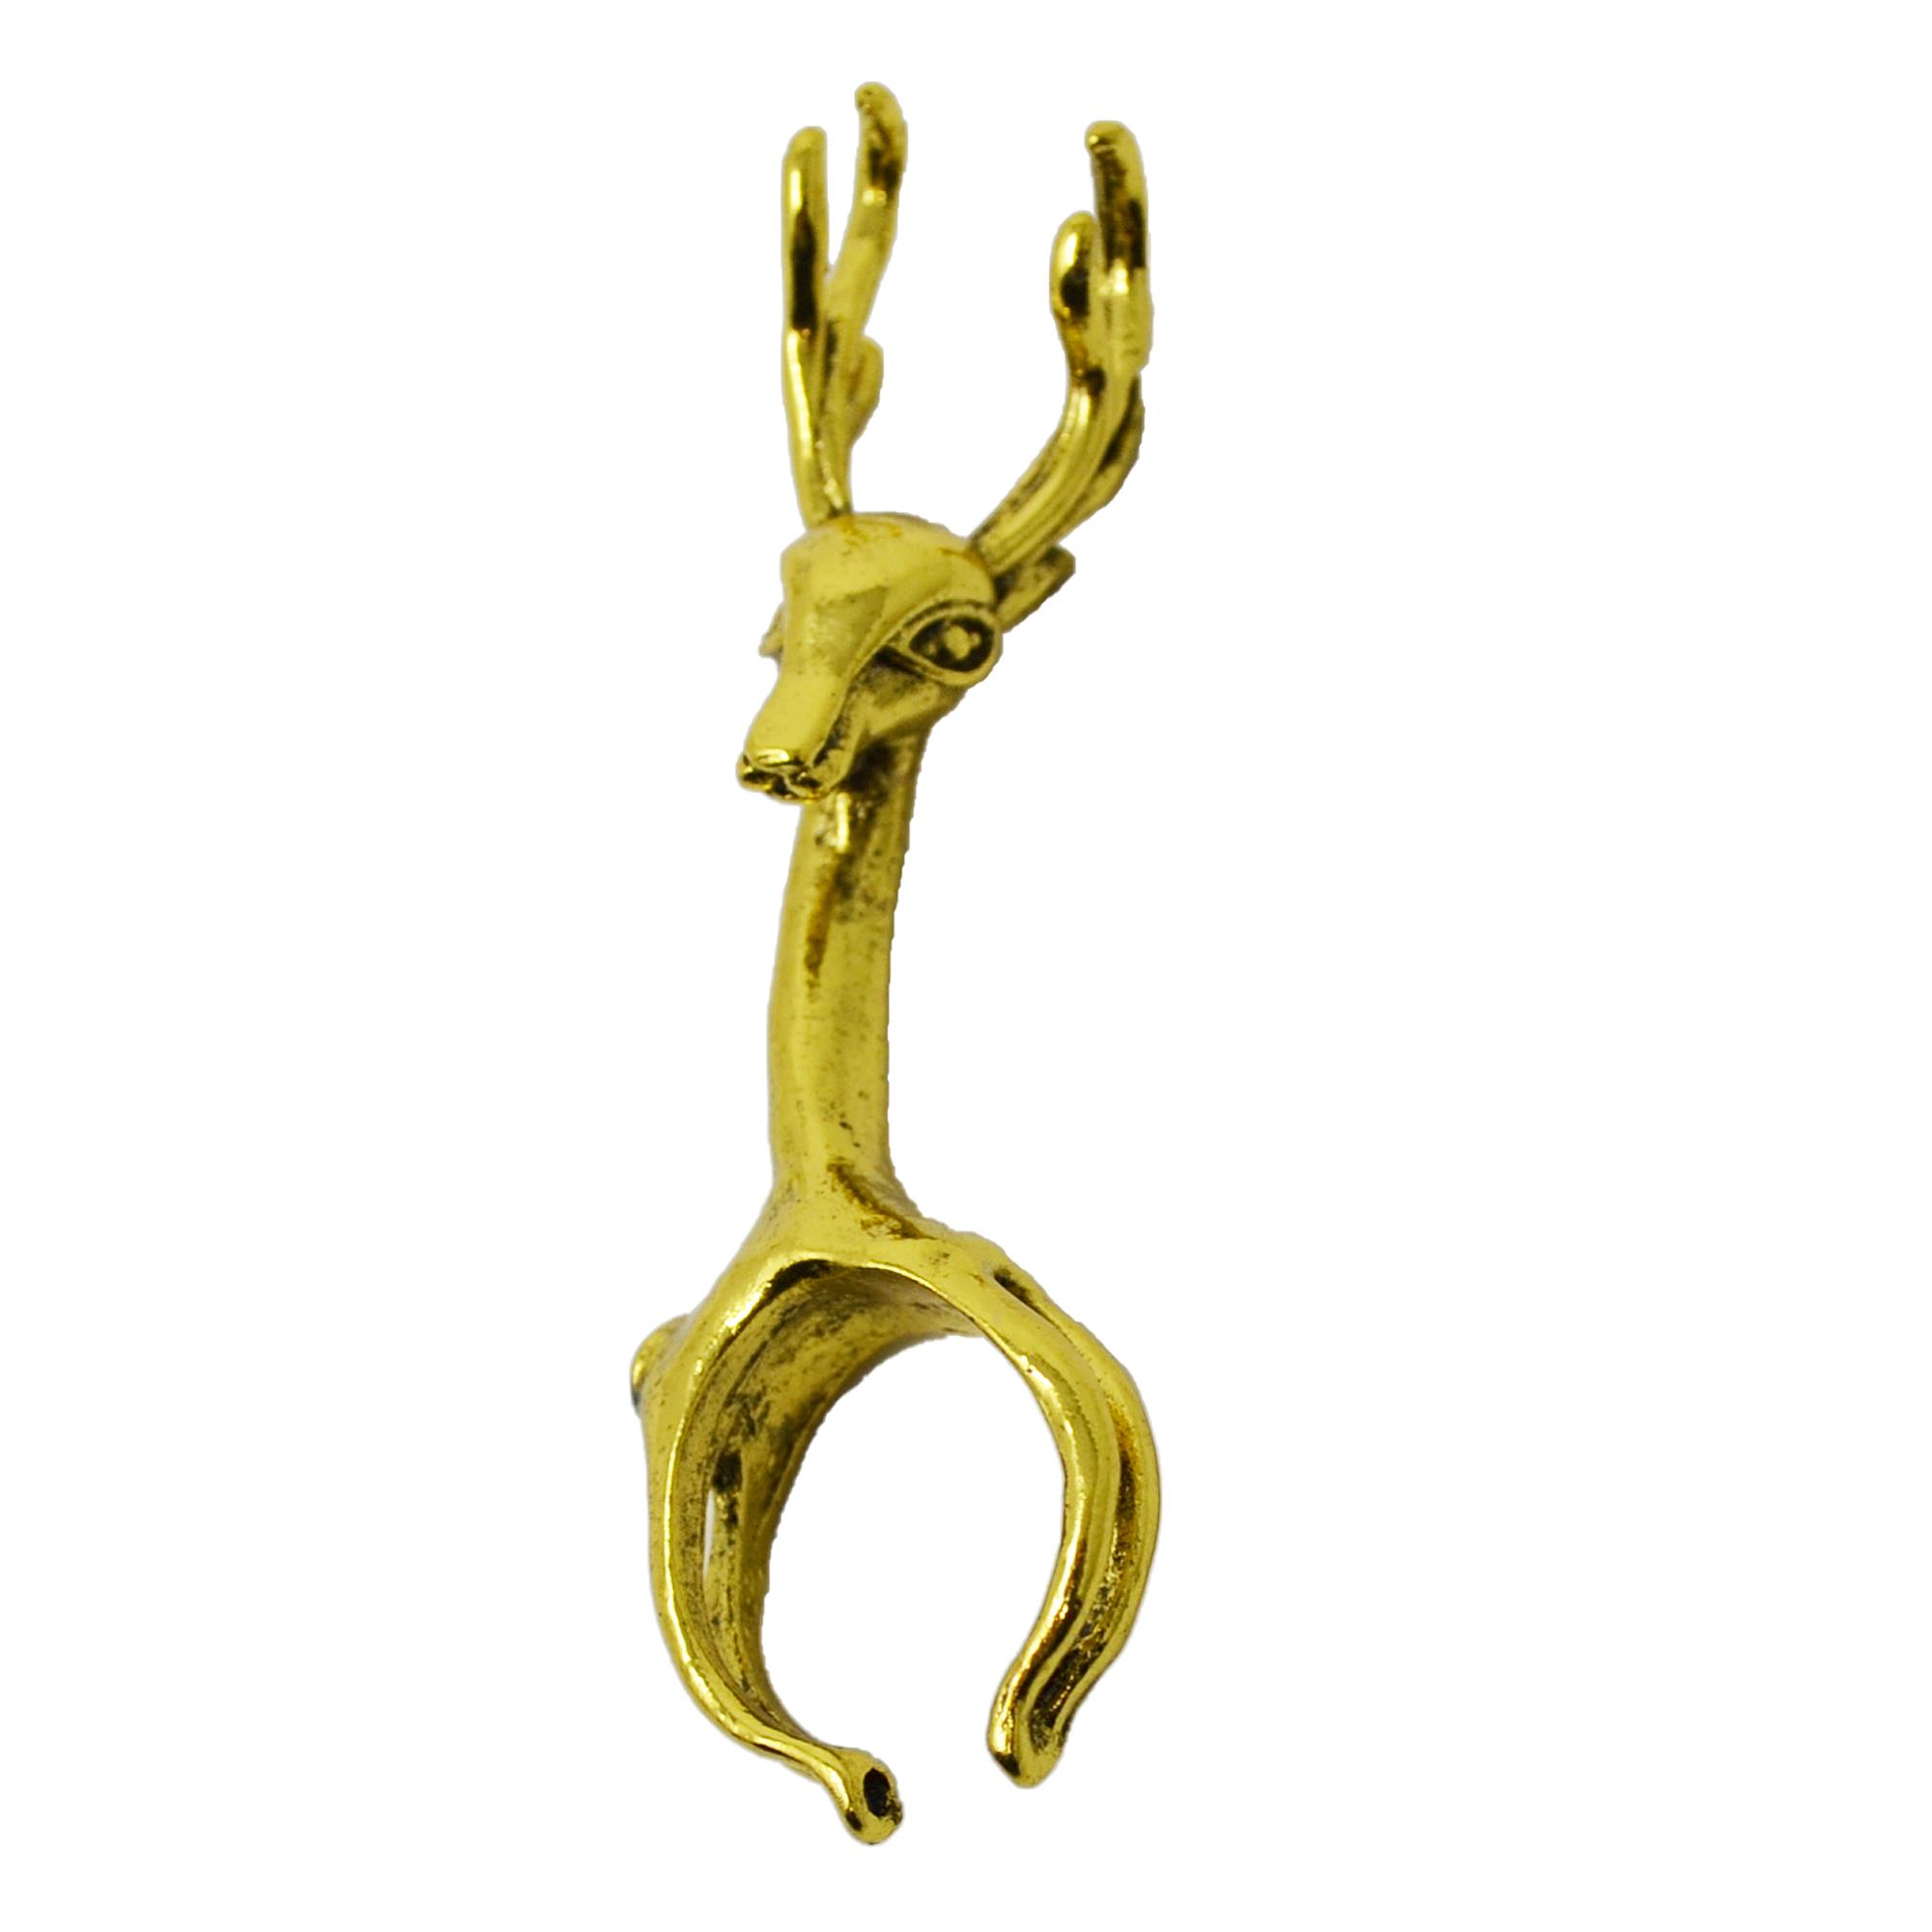 OH DEER I'M STONED GOLD JOINT HOLDER RING